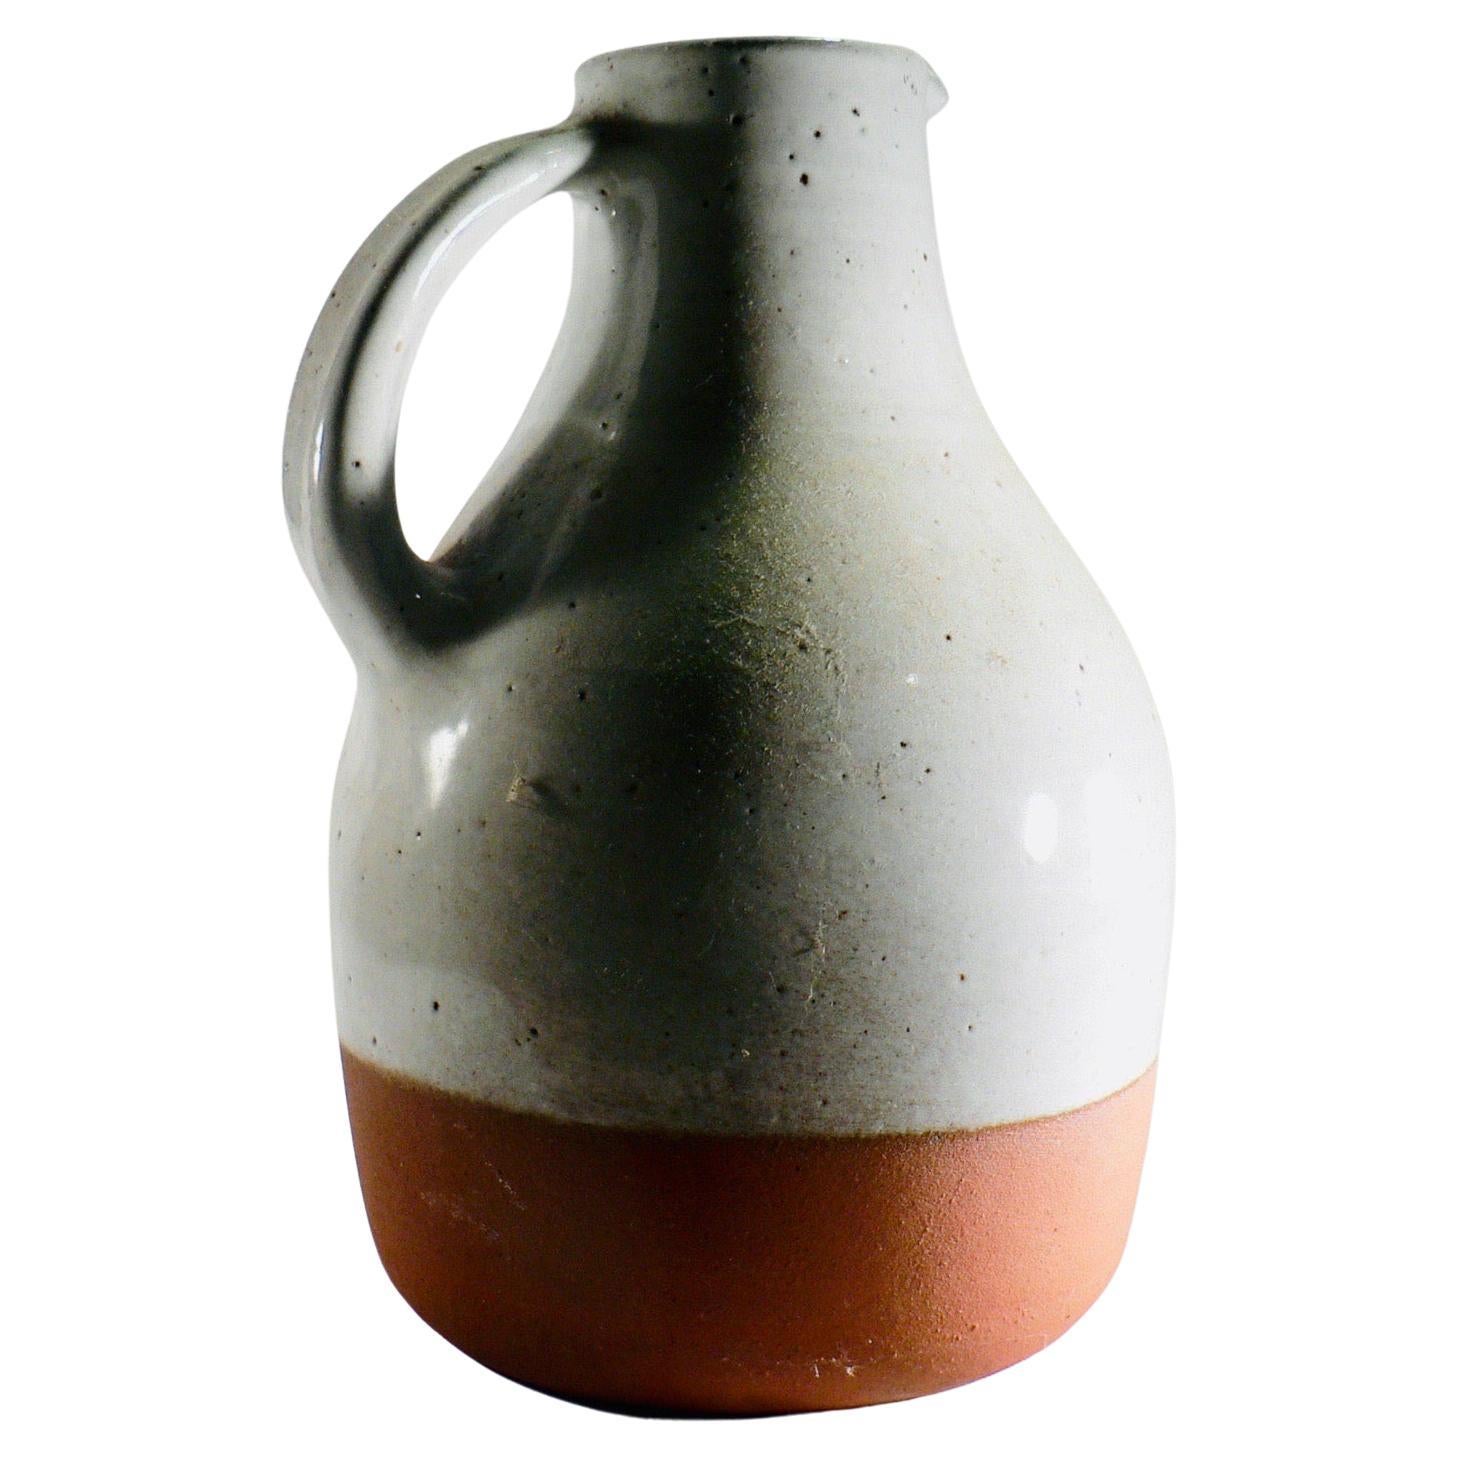 Pitcher in glazed ceramic, created by Jeanne and Norbert Pierlot in the 1960s. A decorative accessory to be displayed alone or as part of a collection. The maker's mark is visible on the base of the object. In very good original